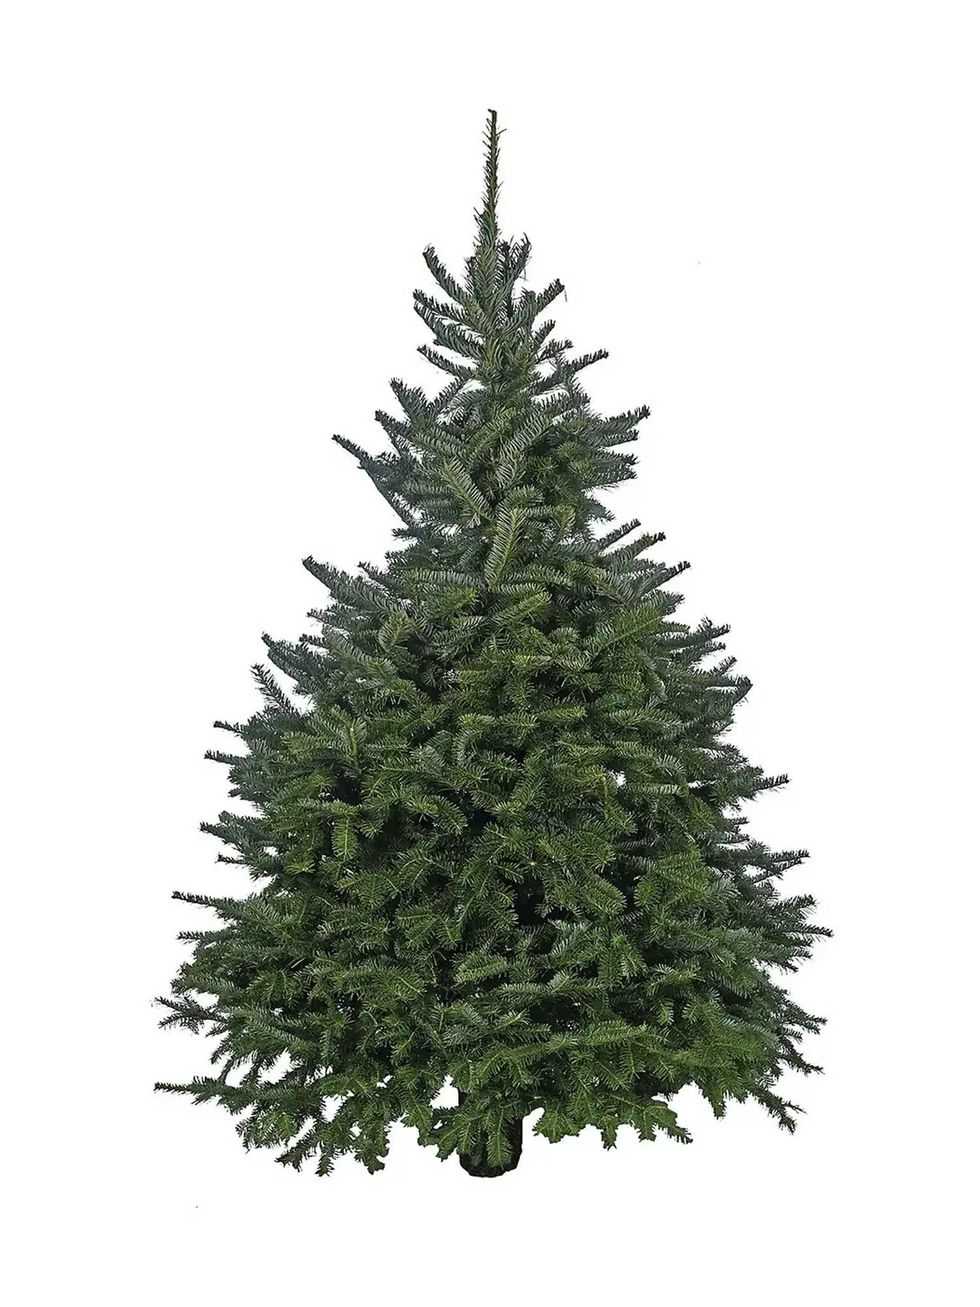 Our ultimate guide to buying a real Christmas tree this year